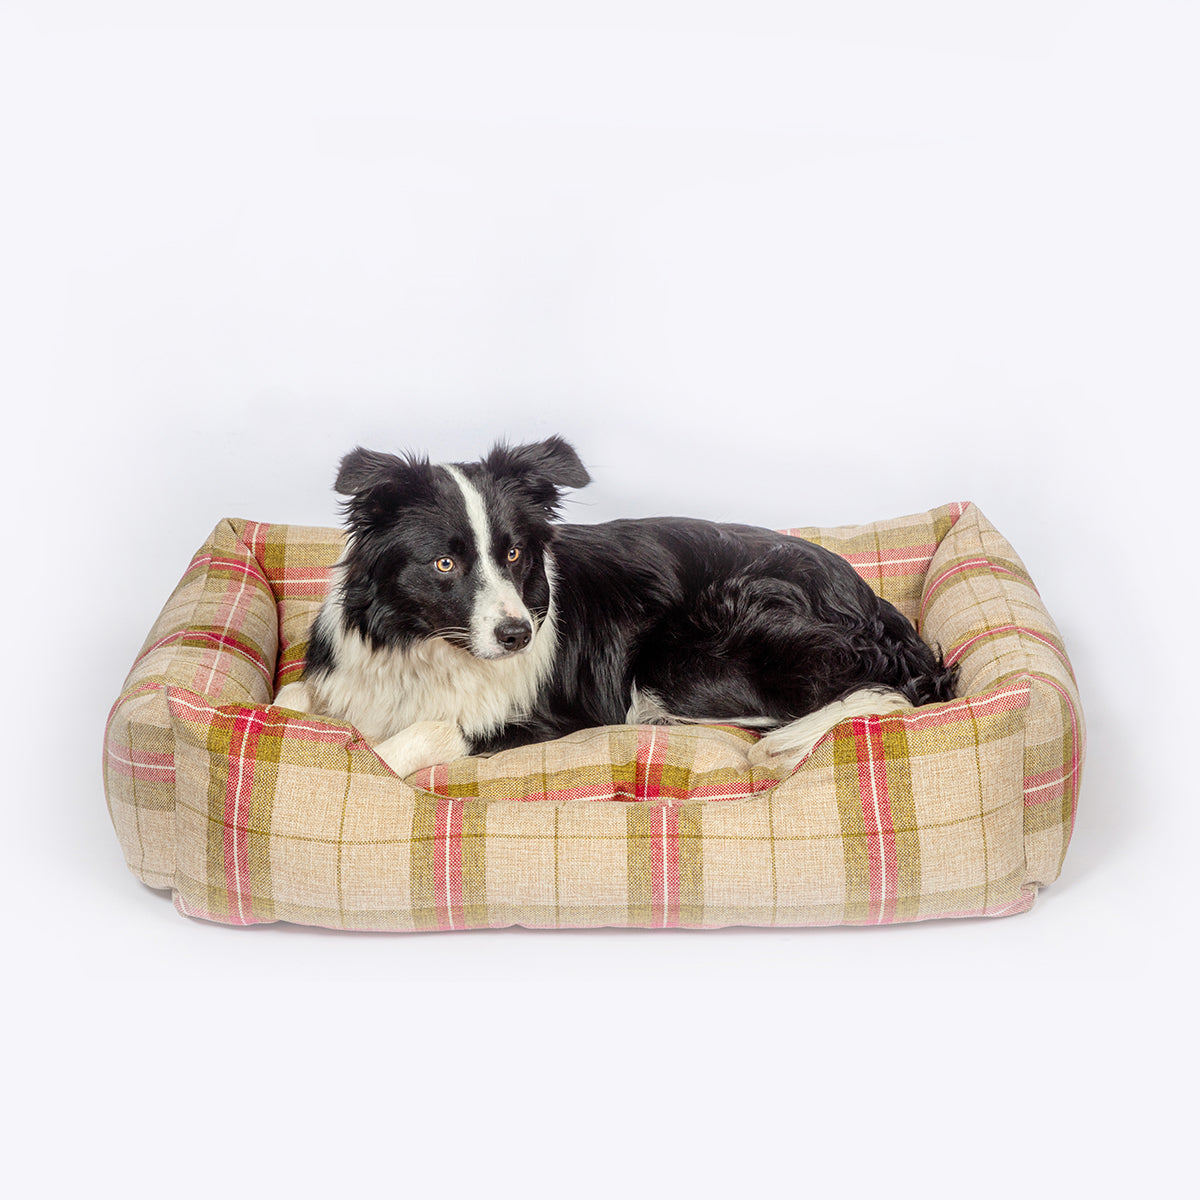 Image of Danish Design Newton Moss Snuggle Dog Bed - Brown/Red - Large 34 inches